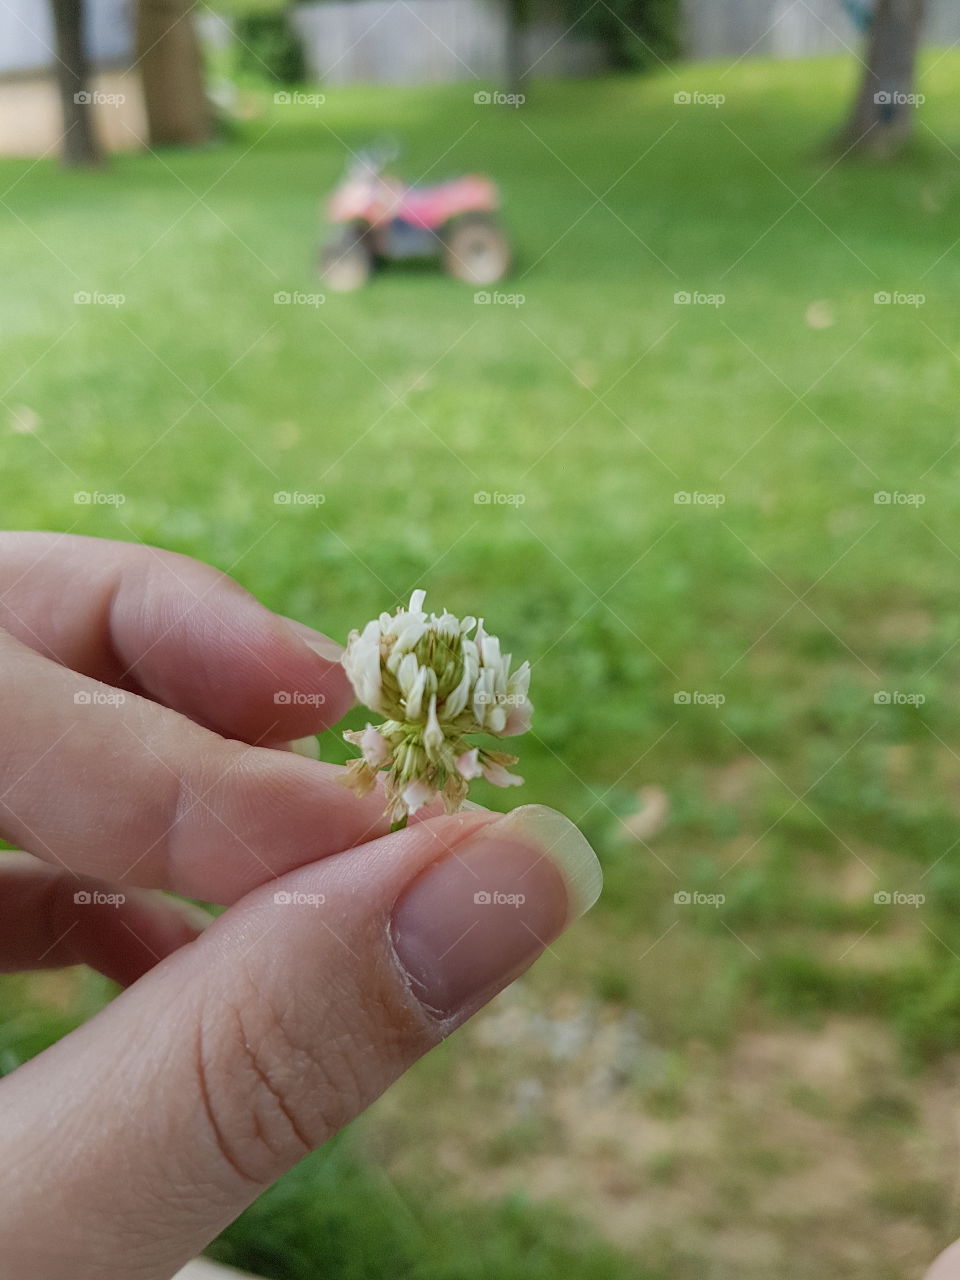 Wildflower held in fingertips in foreground with child's atv blurred in background